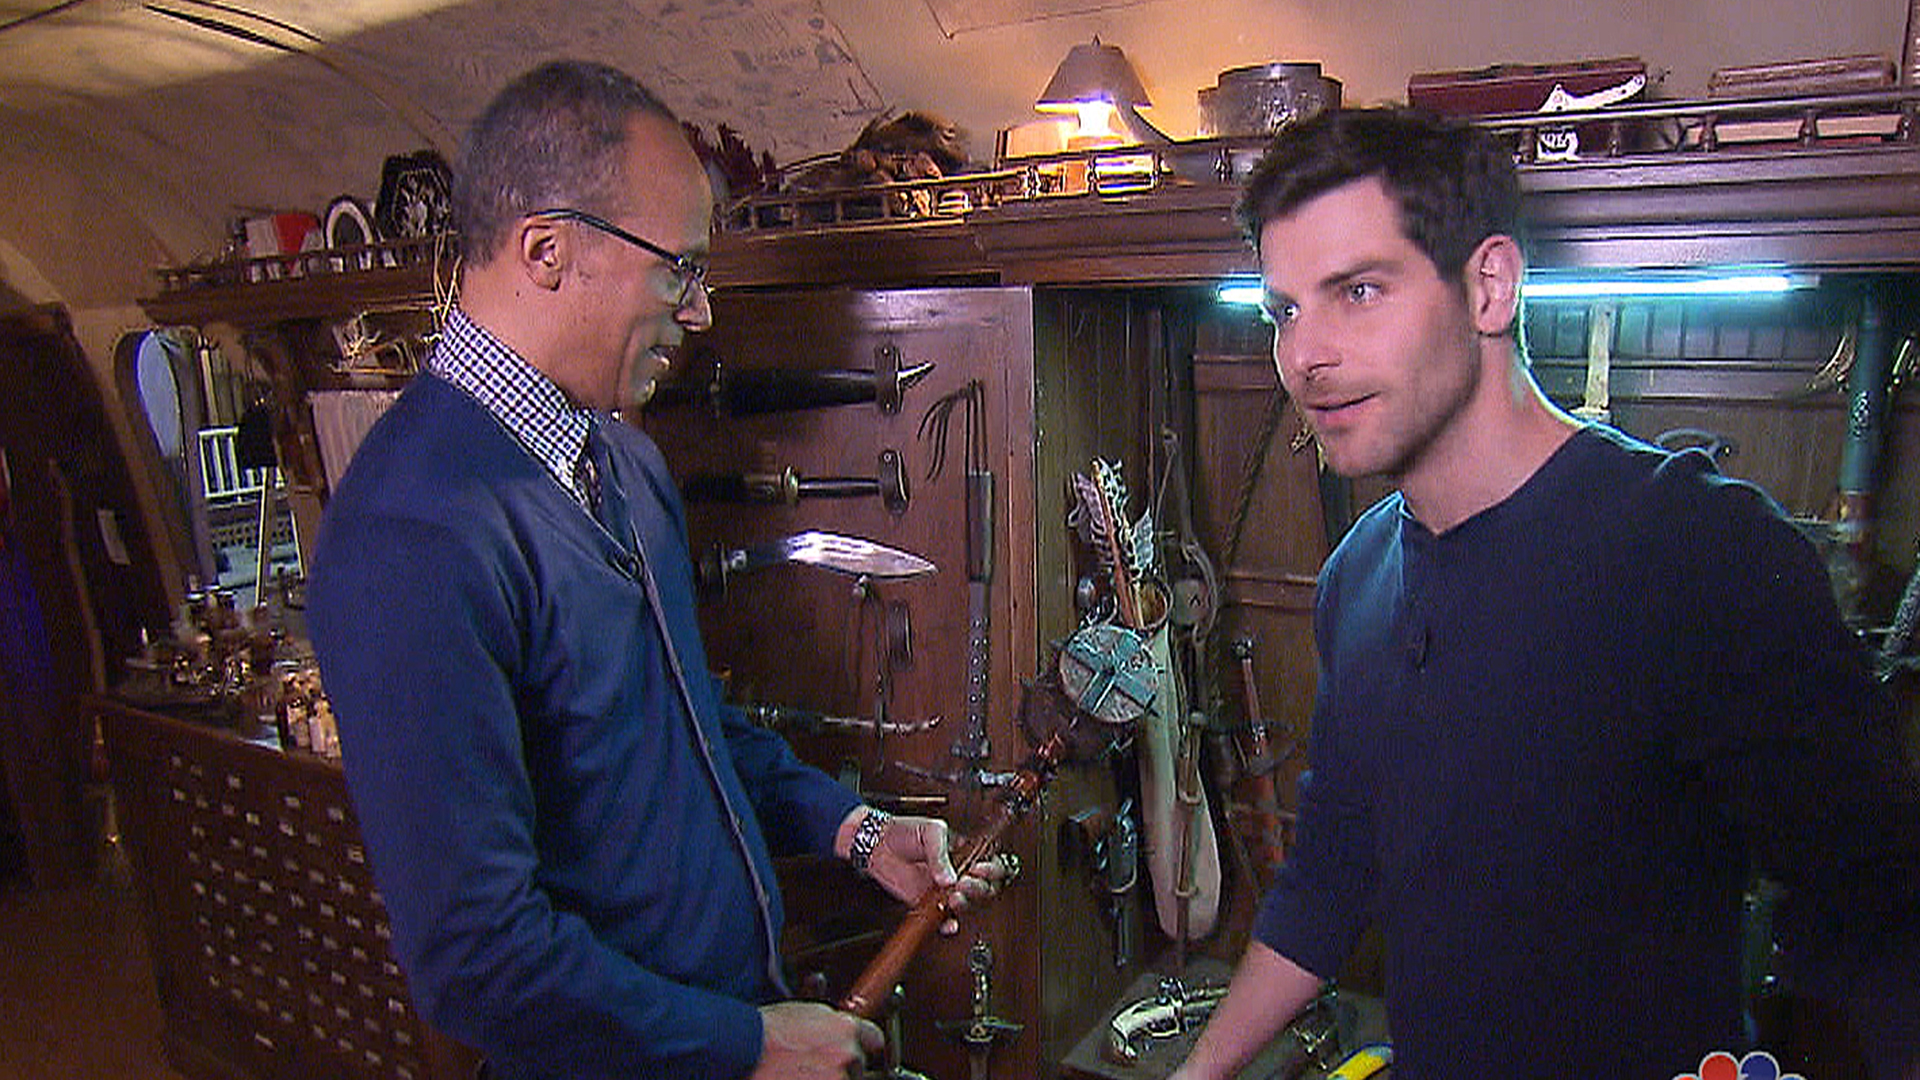 Lester Holt goes behind the scenes of ‘Grimm’ - TODAY.com1920 x 1080